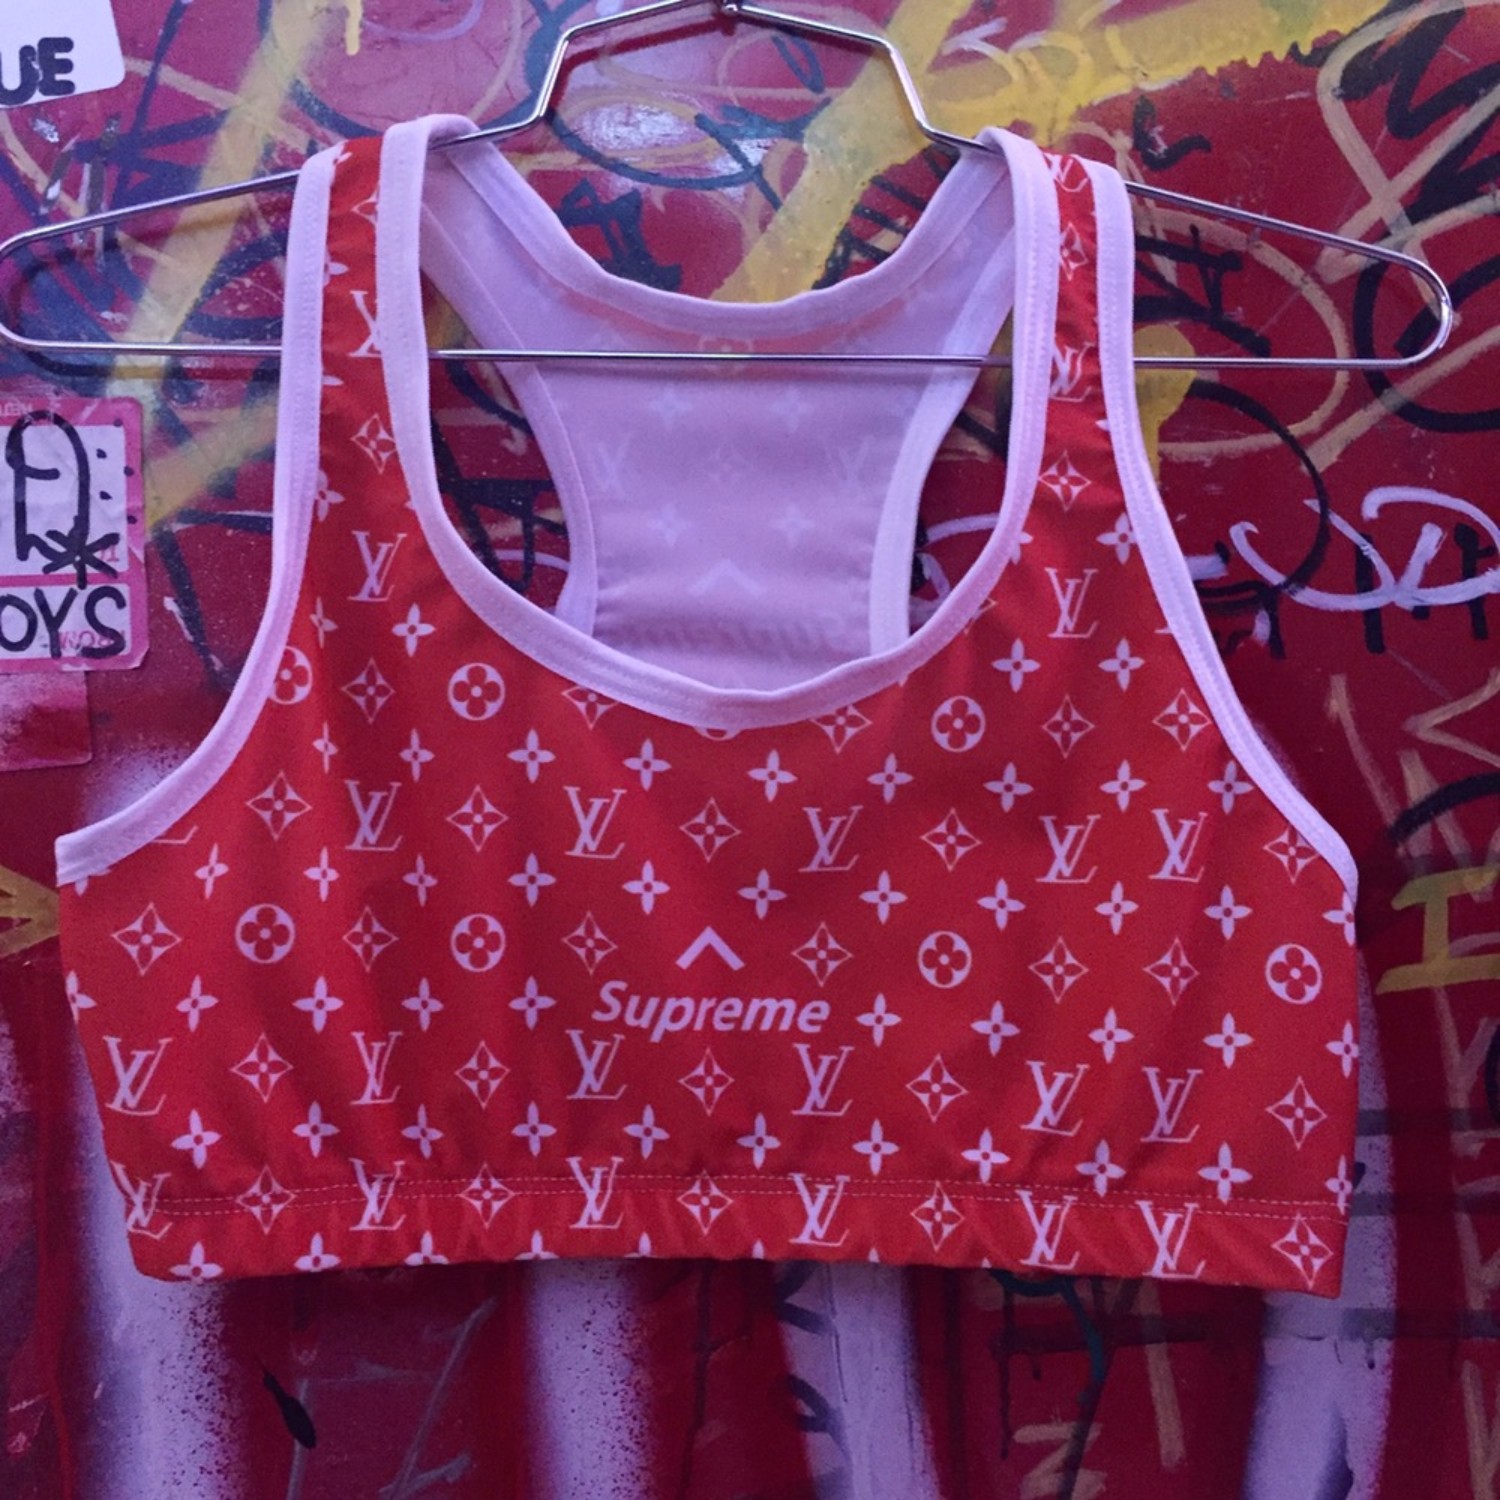 Freak City steps up for women who feel left out by the Supreme and Louis Vuitton collabo